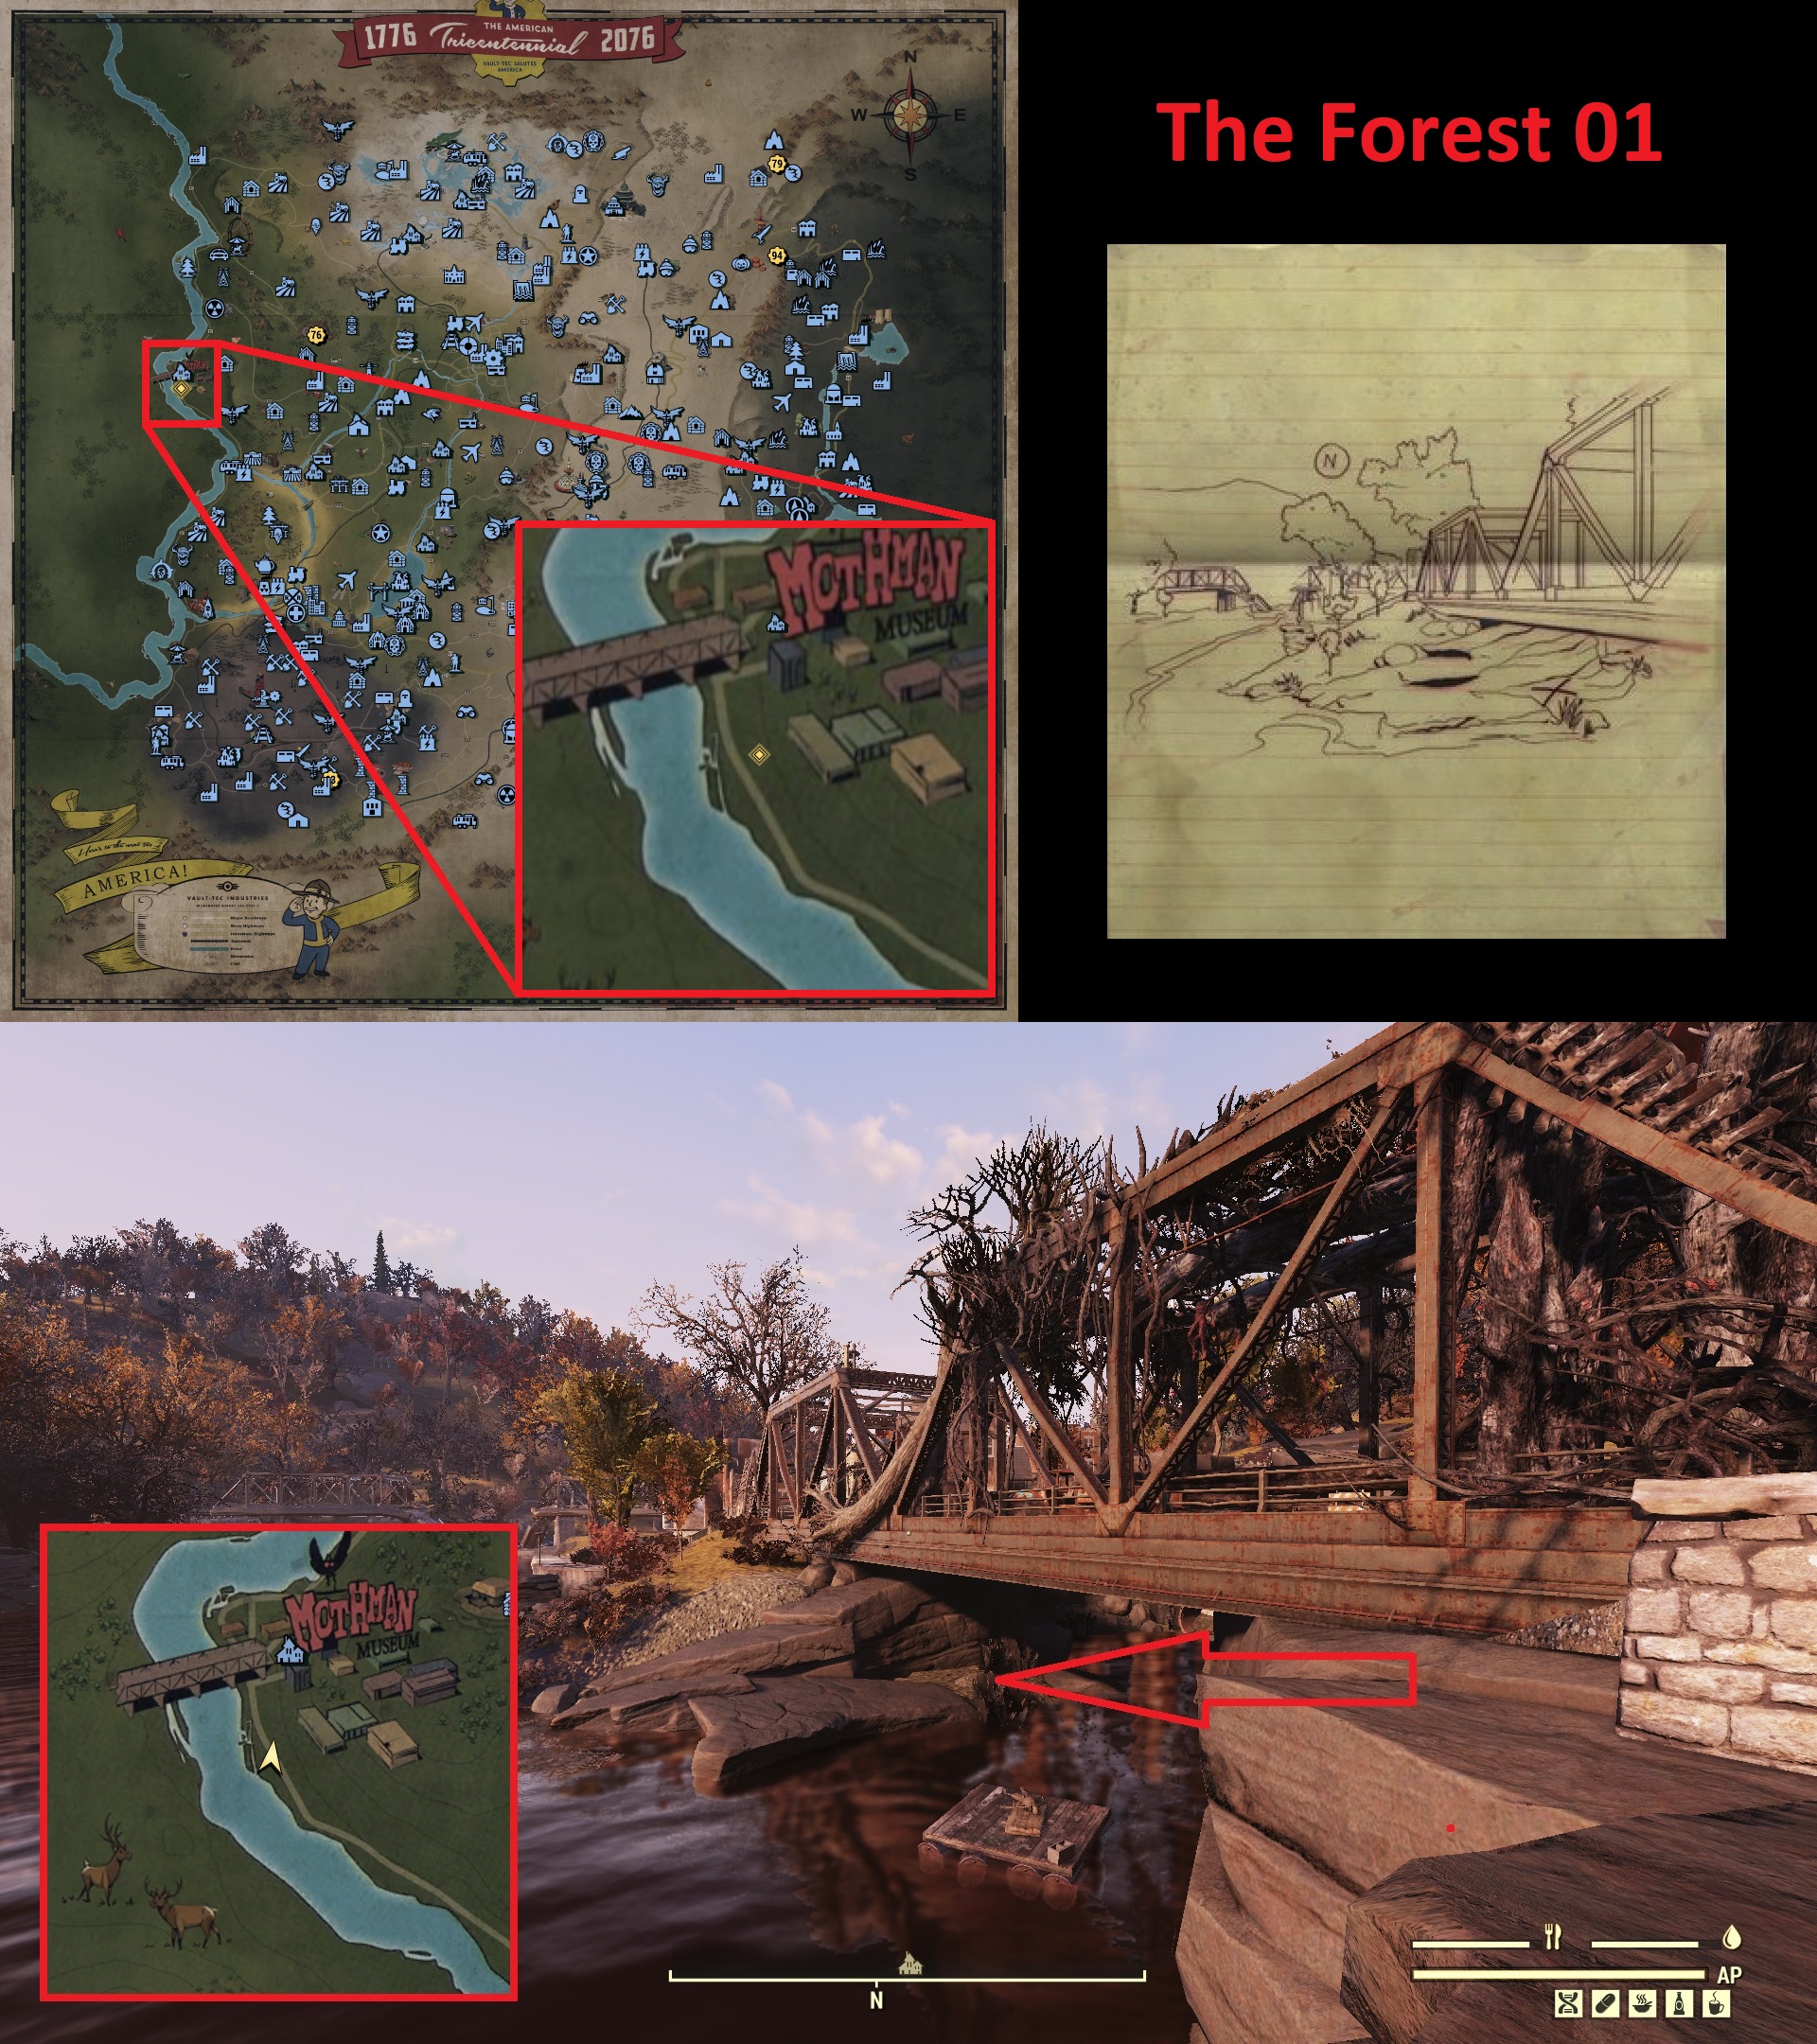 Fallout 76 Treasure Map Locations - The Forest 01 - 5CA0889